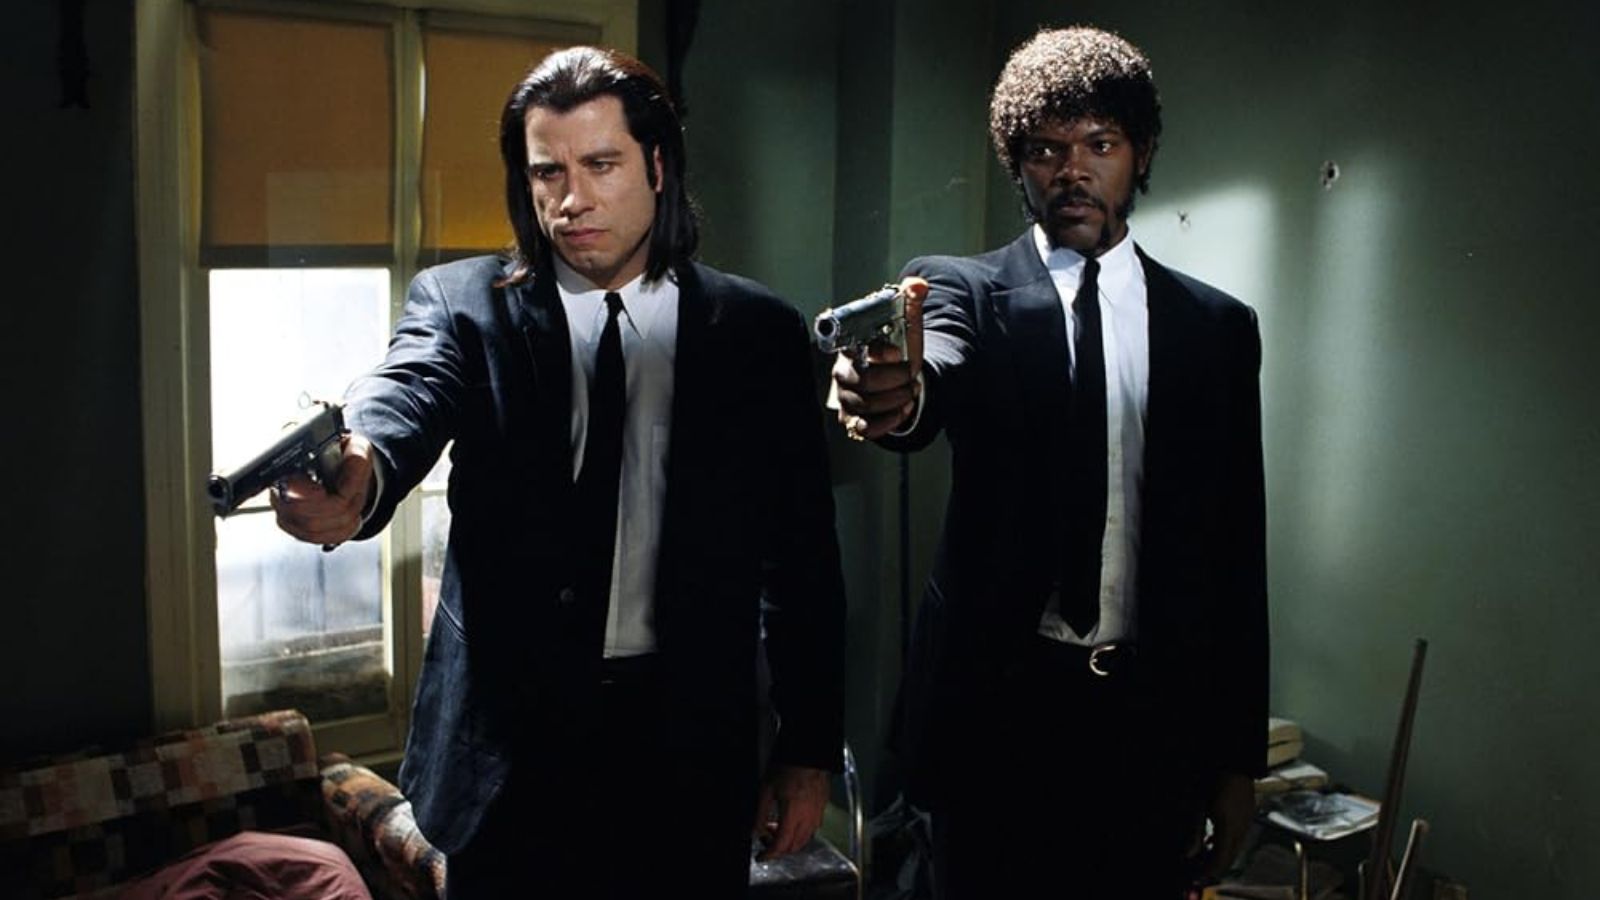 <span>Aptly described as </span><a class="editor-rtfLink" href="https://www.vanityfair.com/hollywood/2013/03/making-of-pulp-fiction-oral-history" rel="noopener"><span>a shot of adrenaline to Hollywood’s heart</span></a><span>, it has to be Pulp Fiction if you watch any of Quentin Tarantino’s movies. Never will you experience a more diverse range of characters and quirky script than within this eccentric masterpiece.</span>